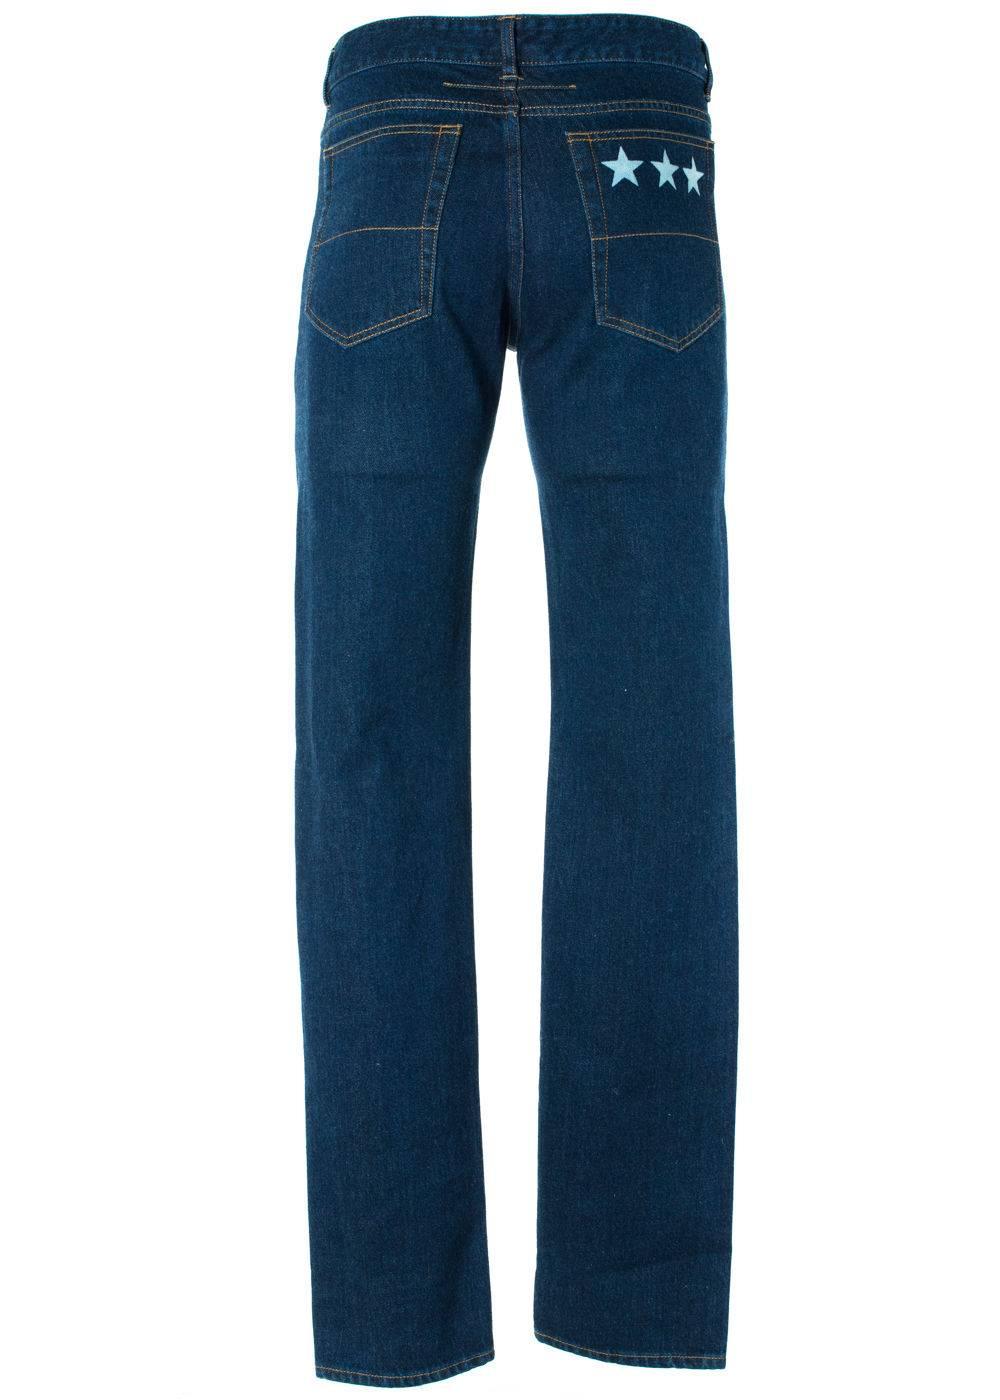 Brand New Givenchy Men's Jeans
Original Tags
Retails in Stores & Online for $625
Men's Size US 30 Fits True to Size

Trendy casual jeans from fashion house Givenchy with signature star accents on the back of the bottoms. Perfect for a casual day out